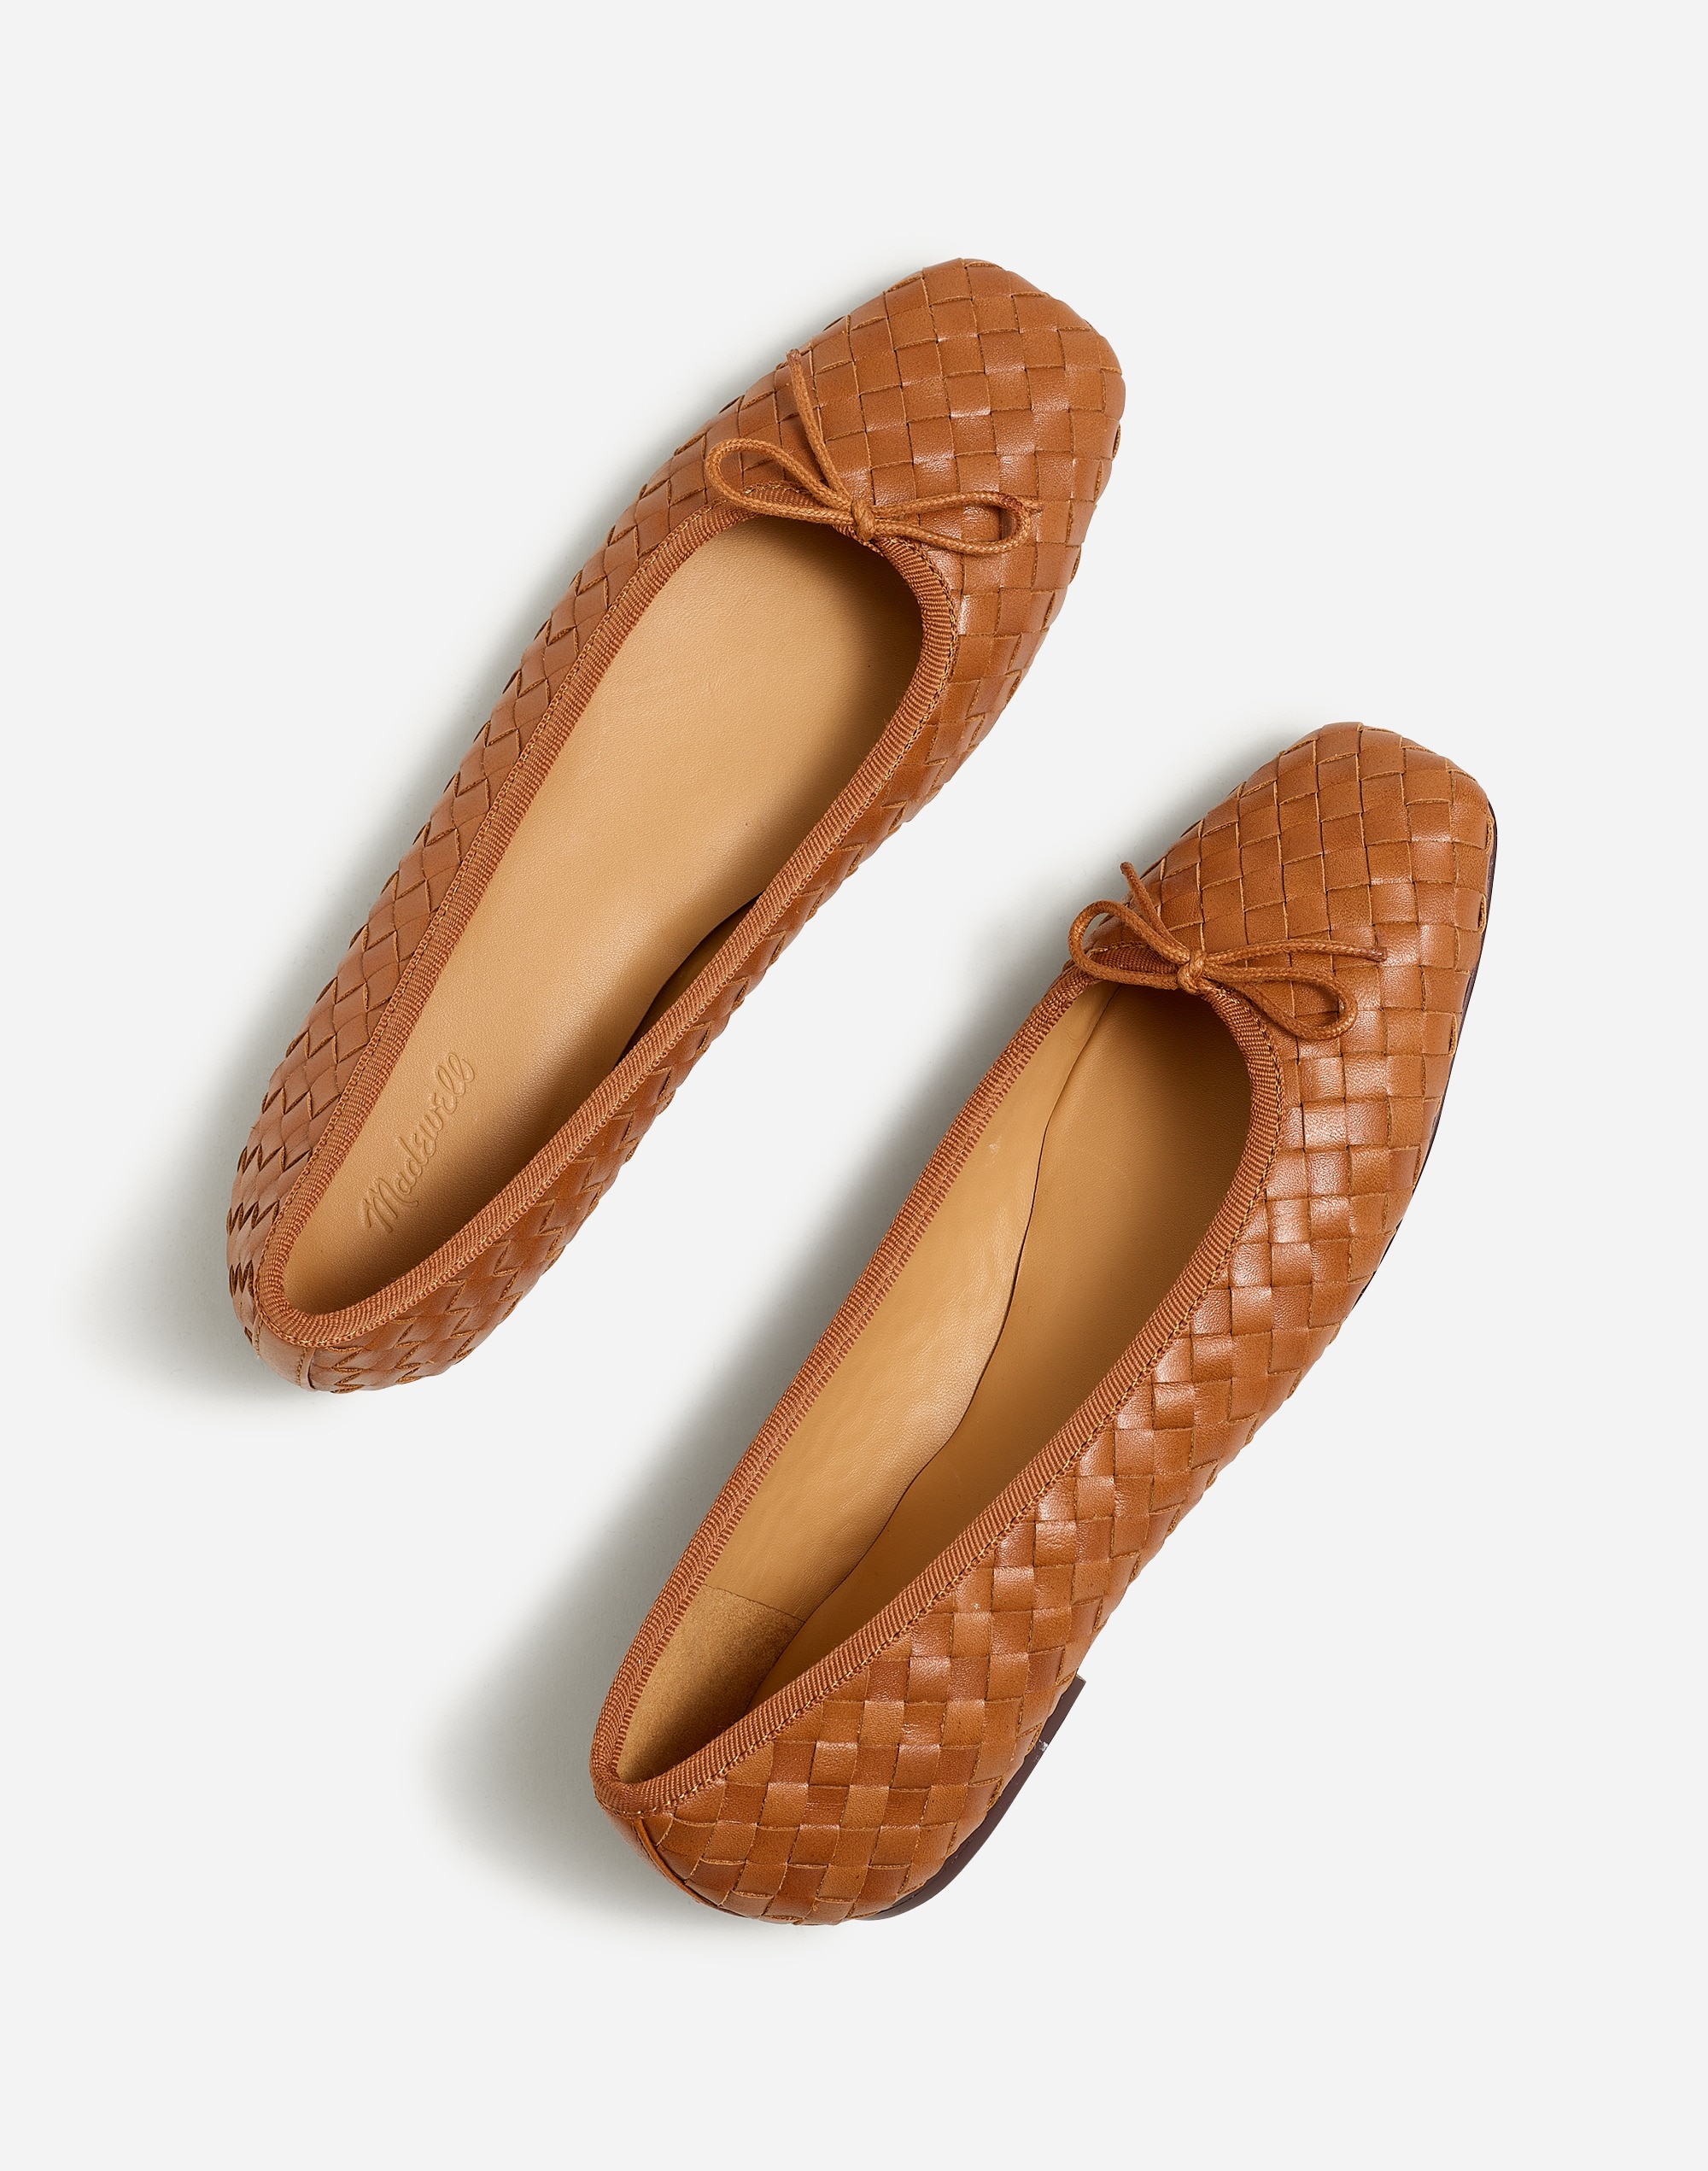 Women's Leather Woven Flat with Stripes